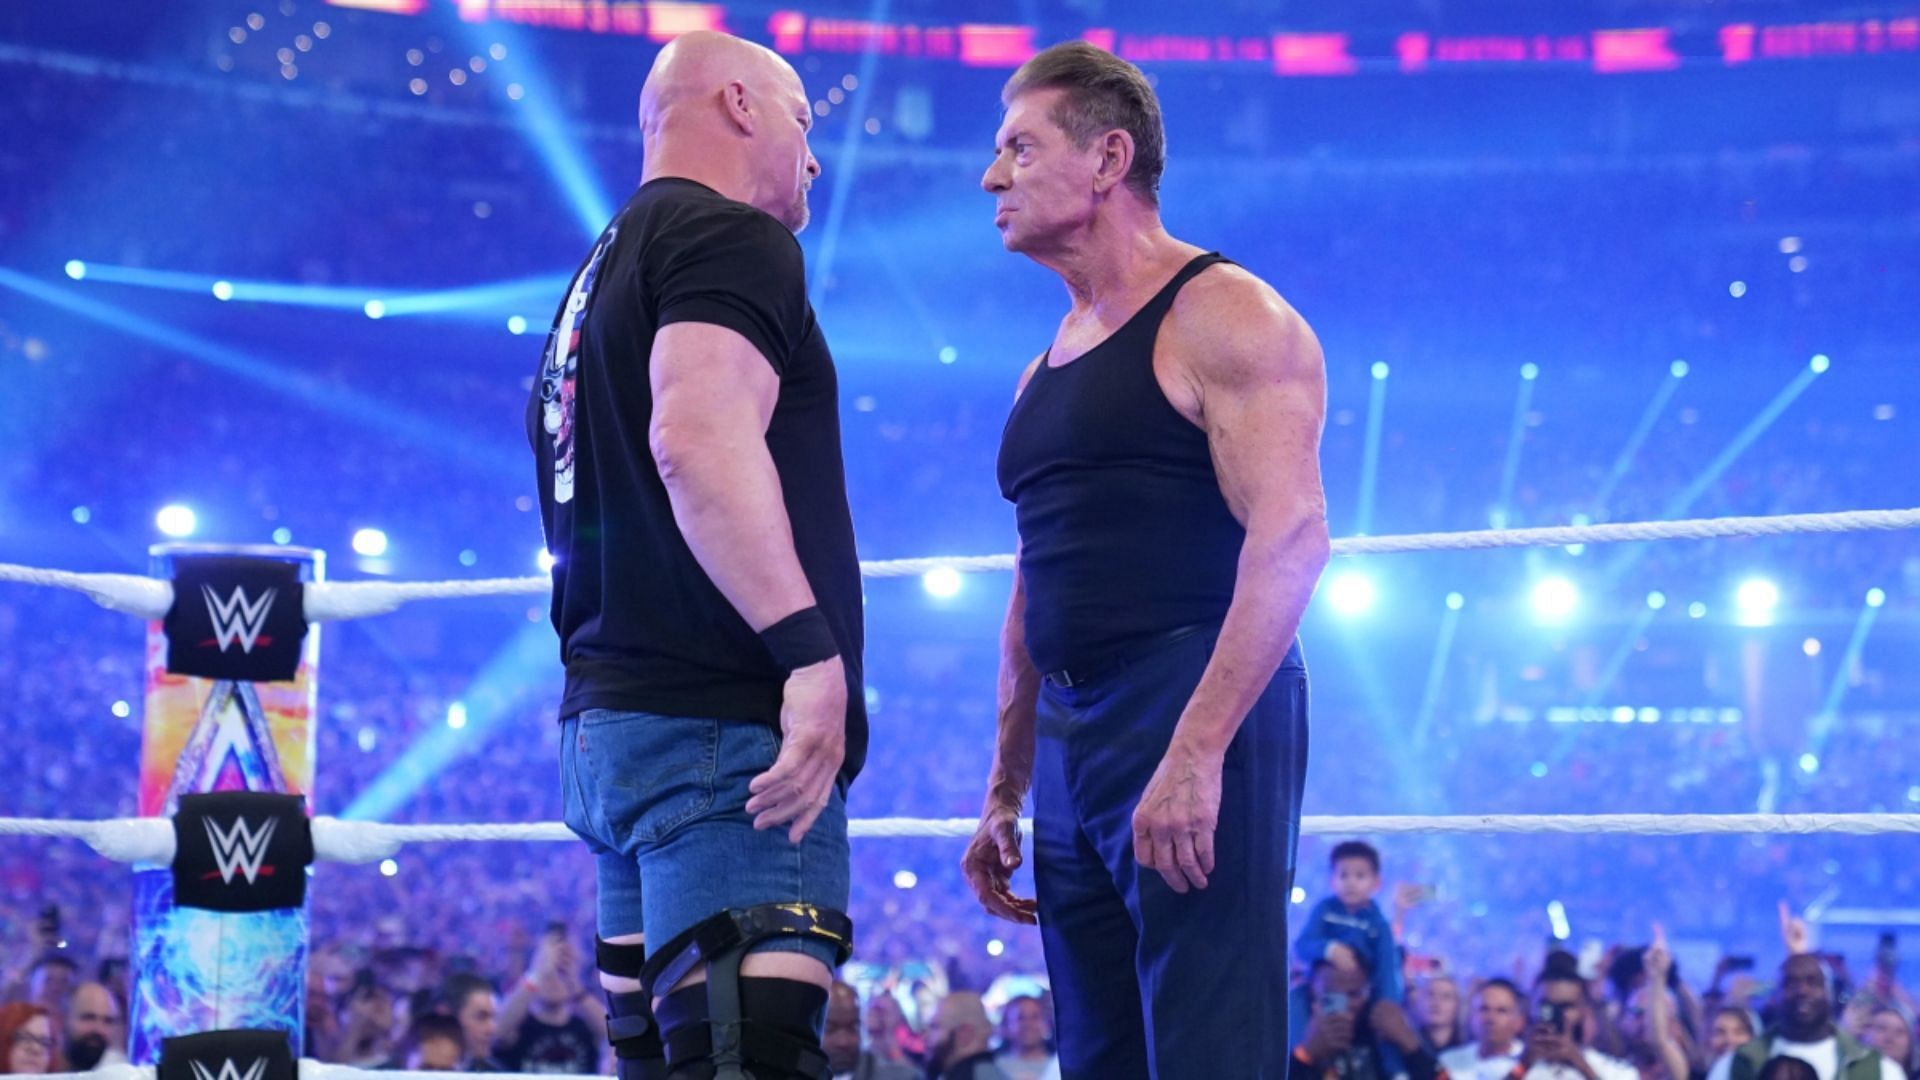 Vince McMahon had a heated interaction with Steve Austin at WrestleMania